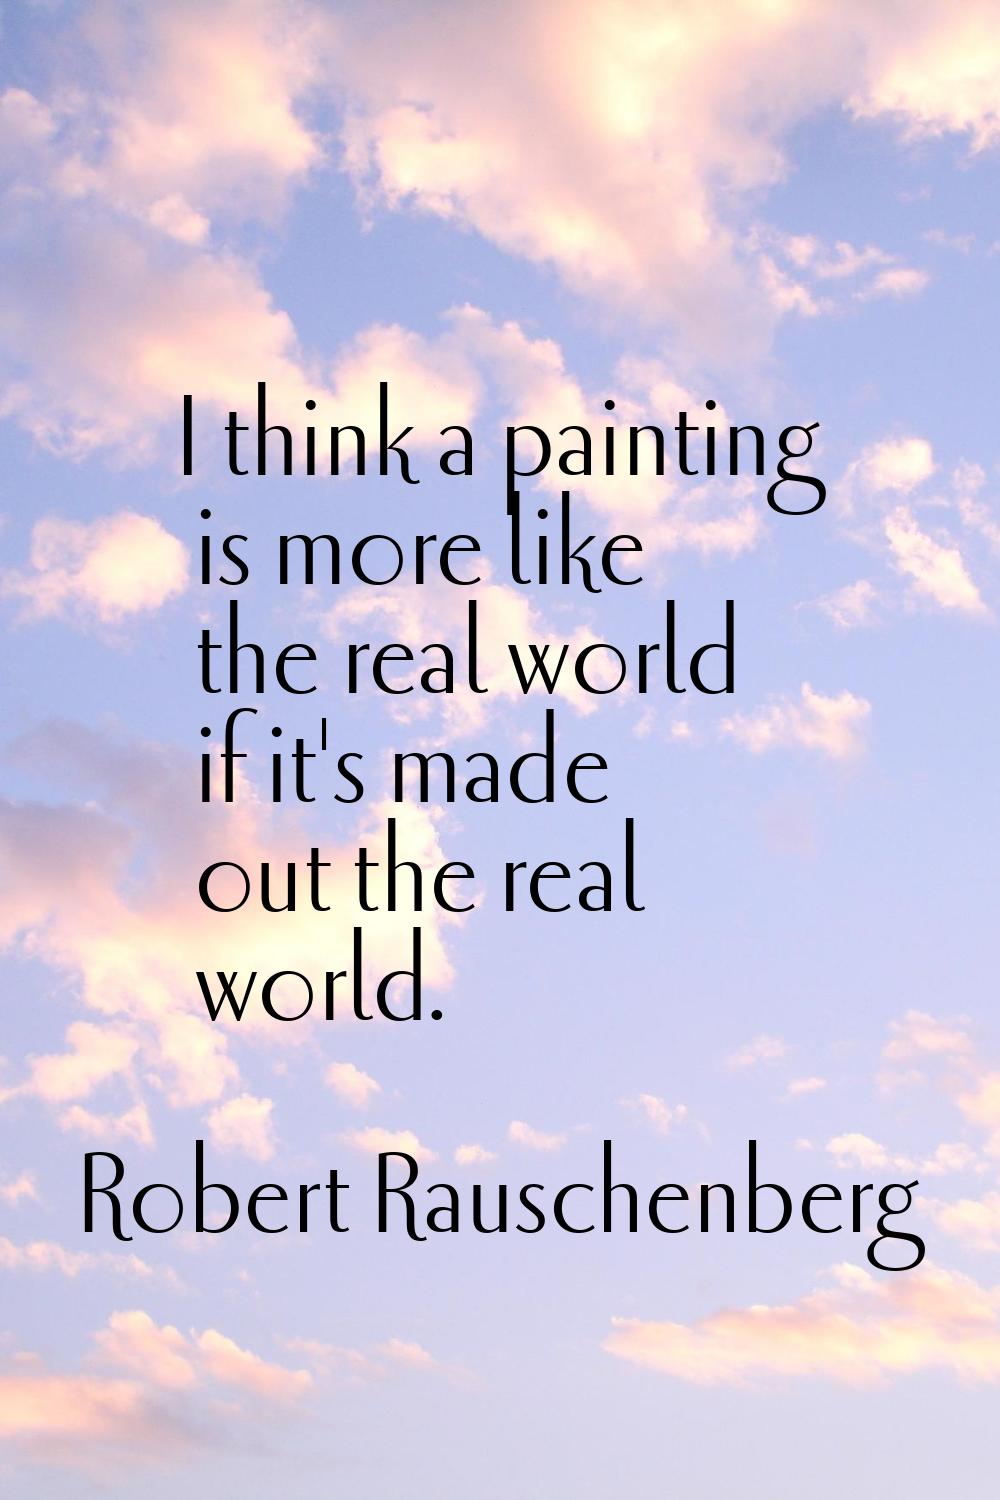 I think a painting is more like the real world if it's made out the real world.